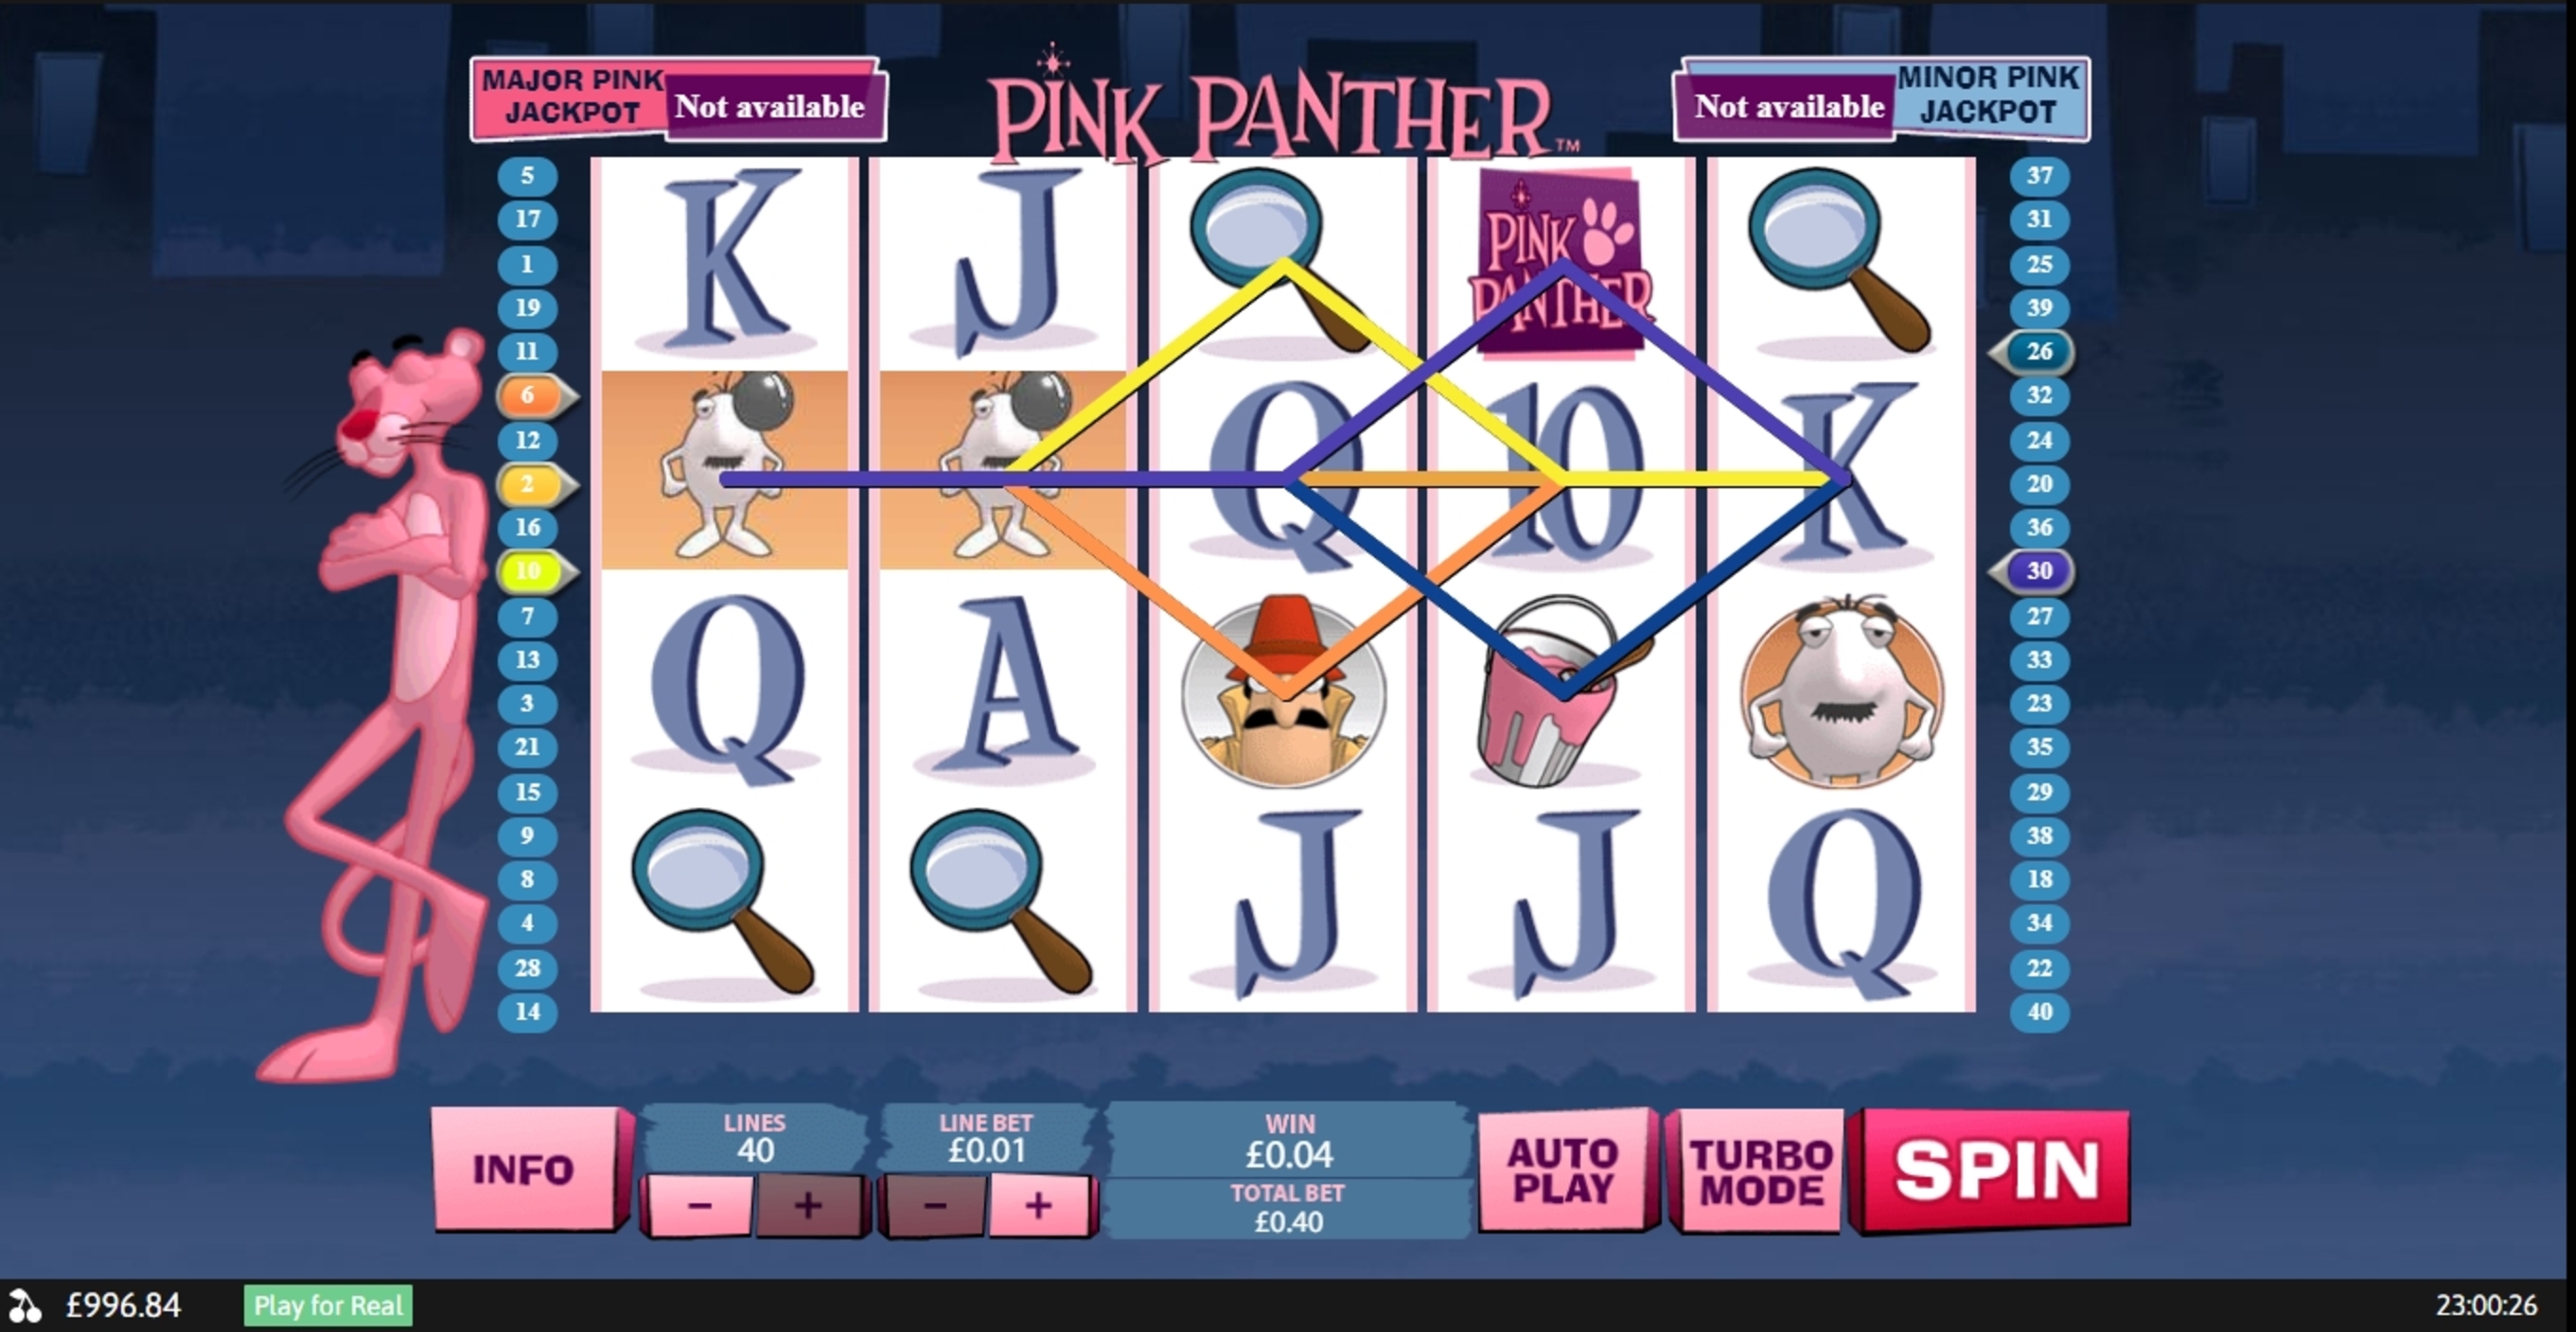 Win Money in Pink Panther Free Slot Game by Playtech